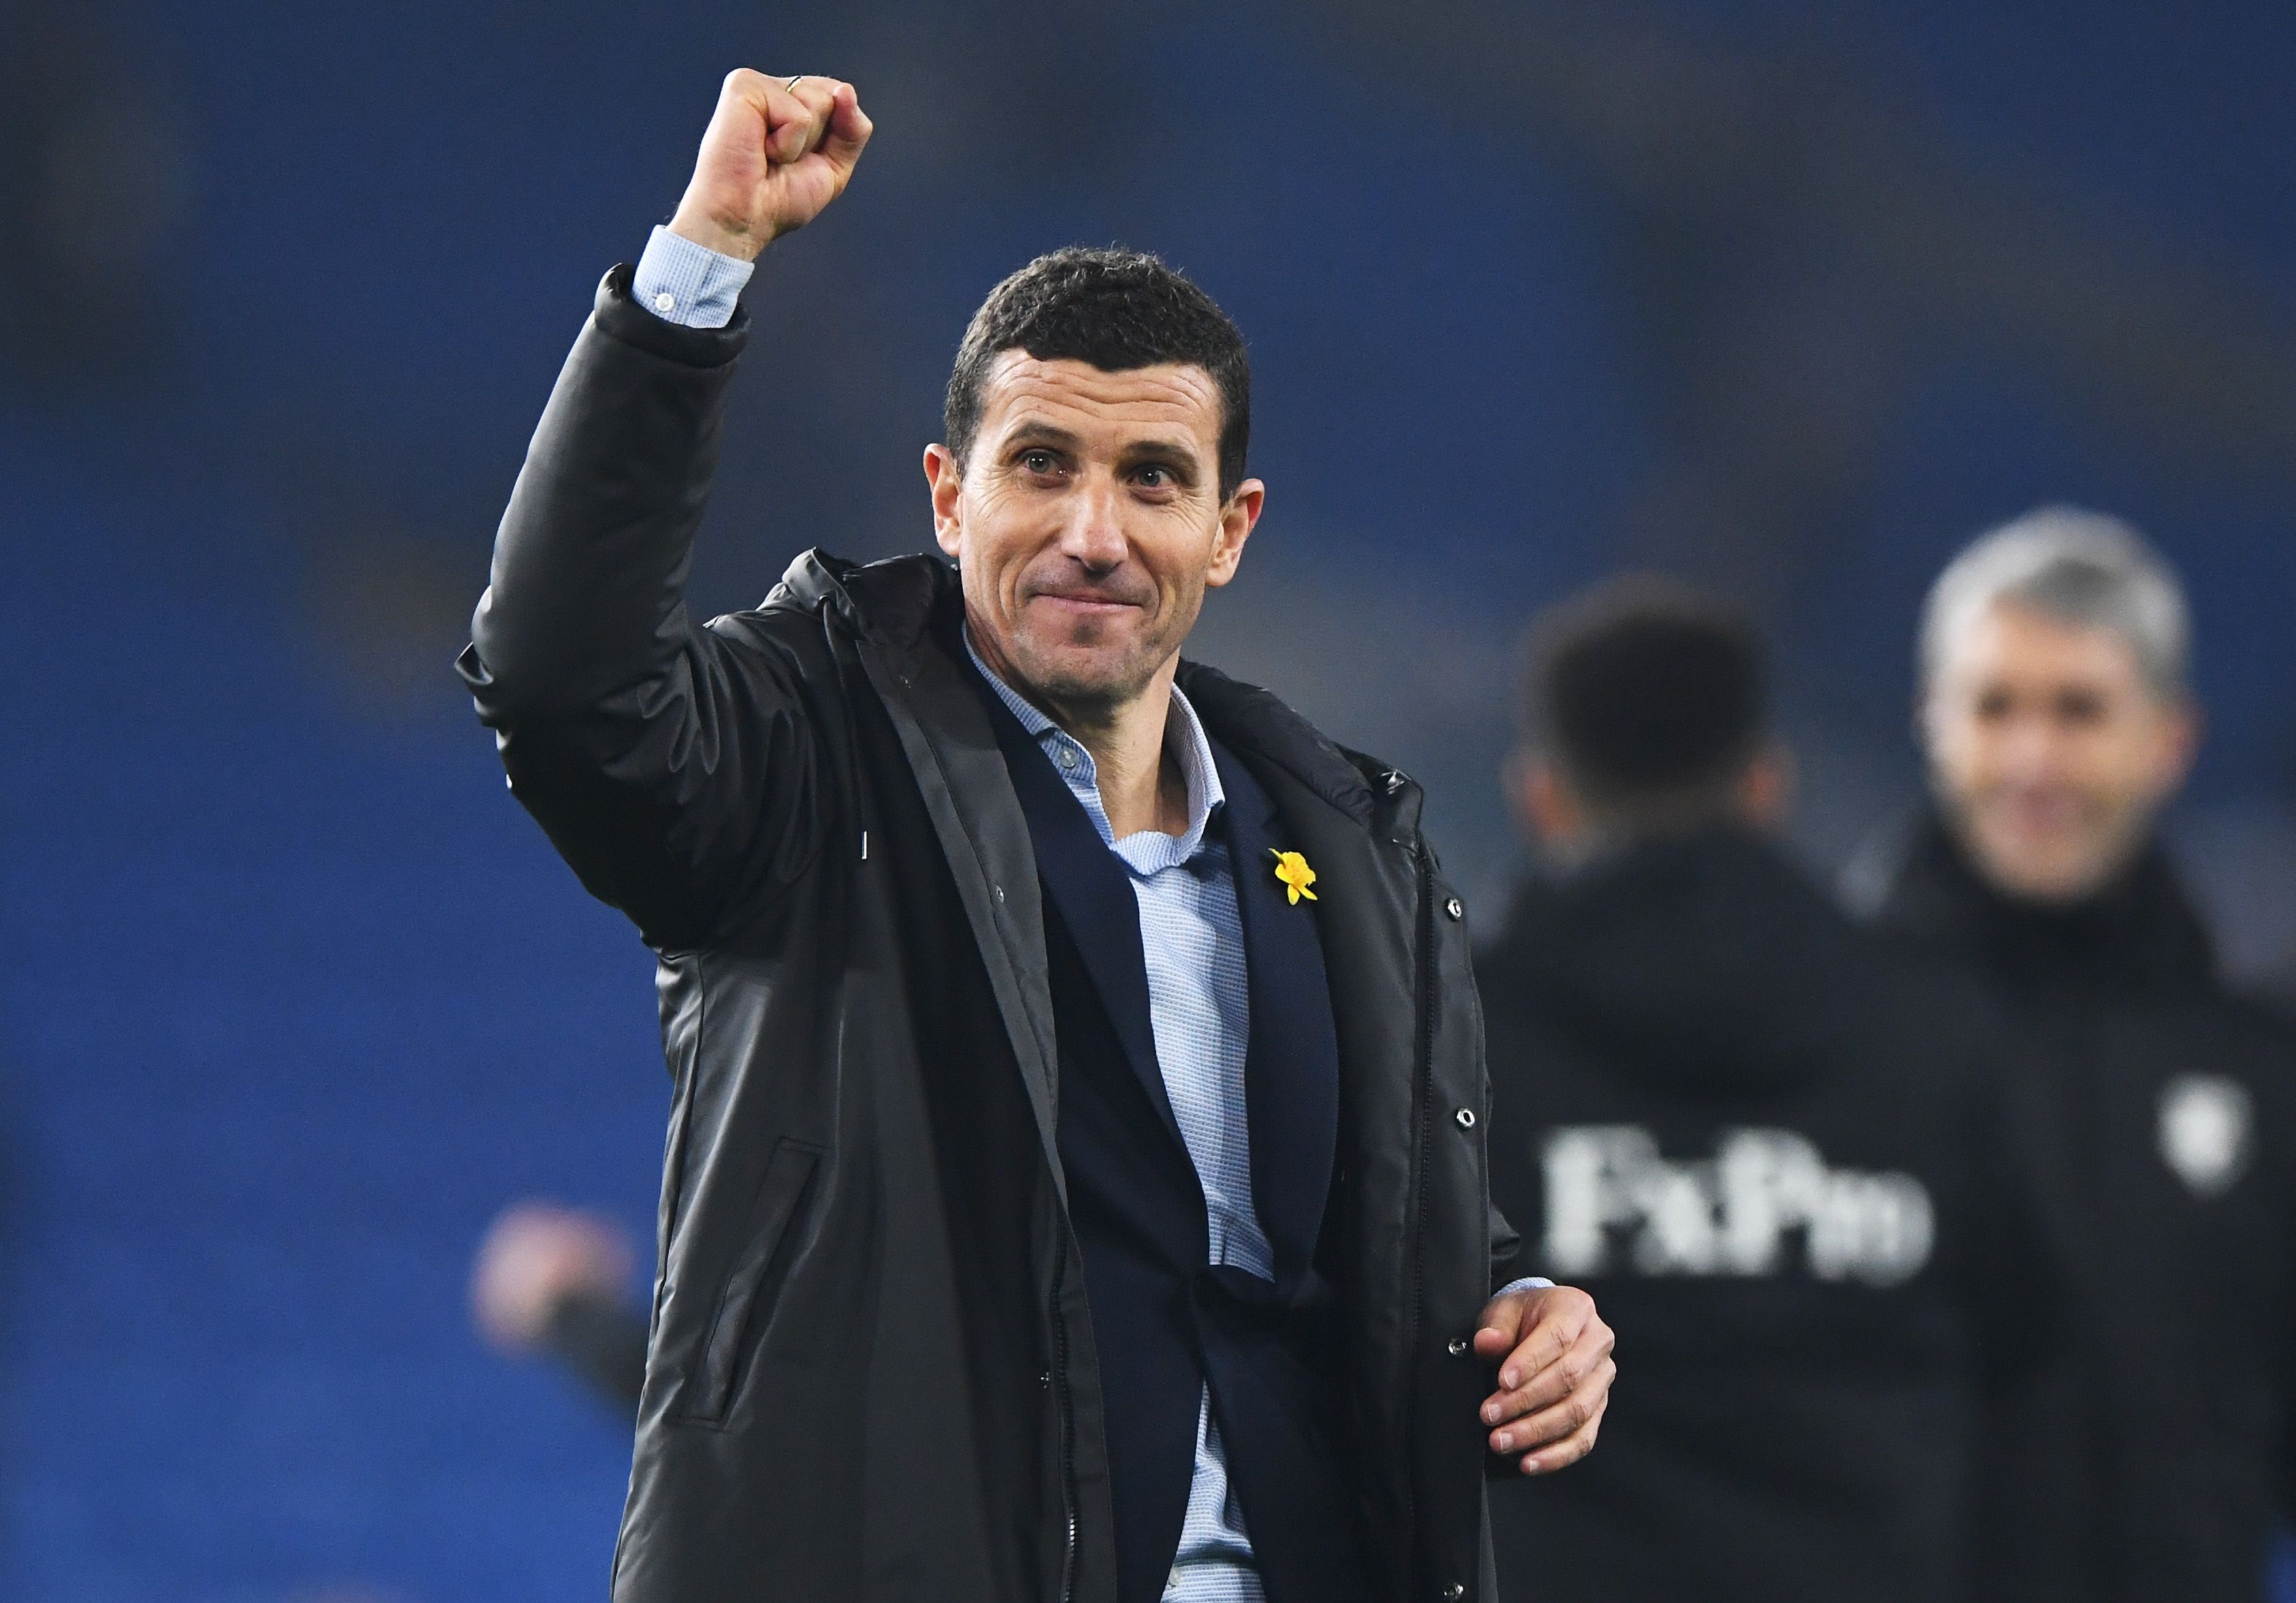 Former Watford manager Javi Gracia fist pumping to the away supporters